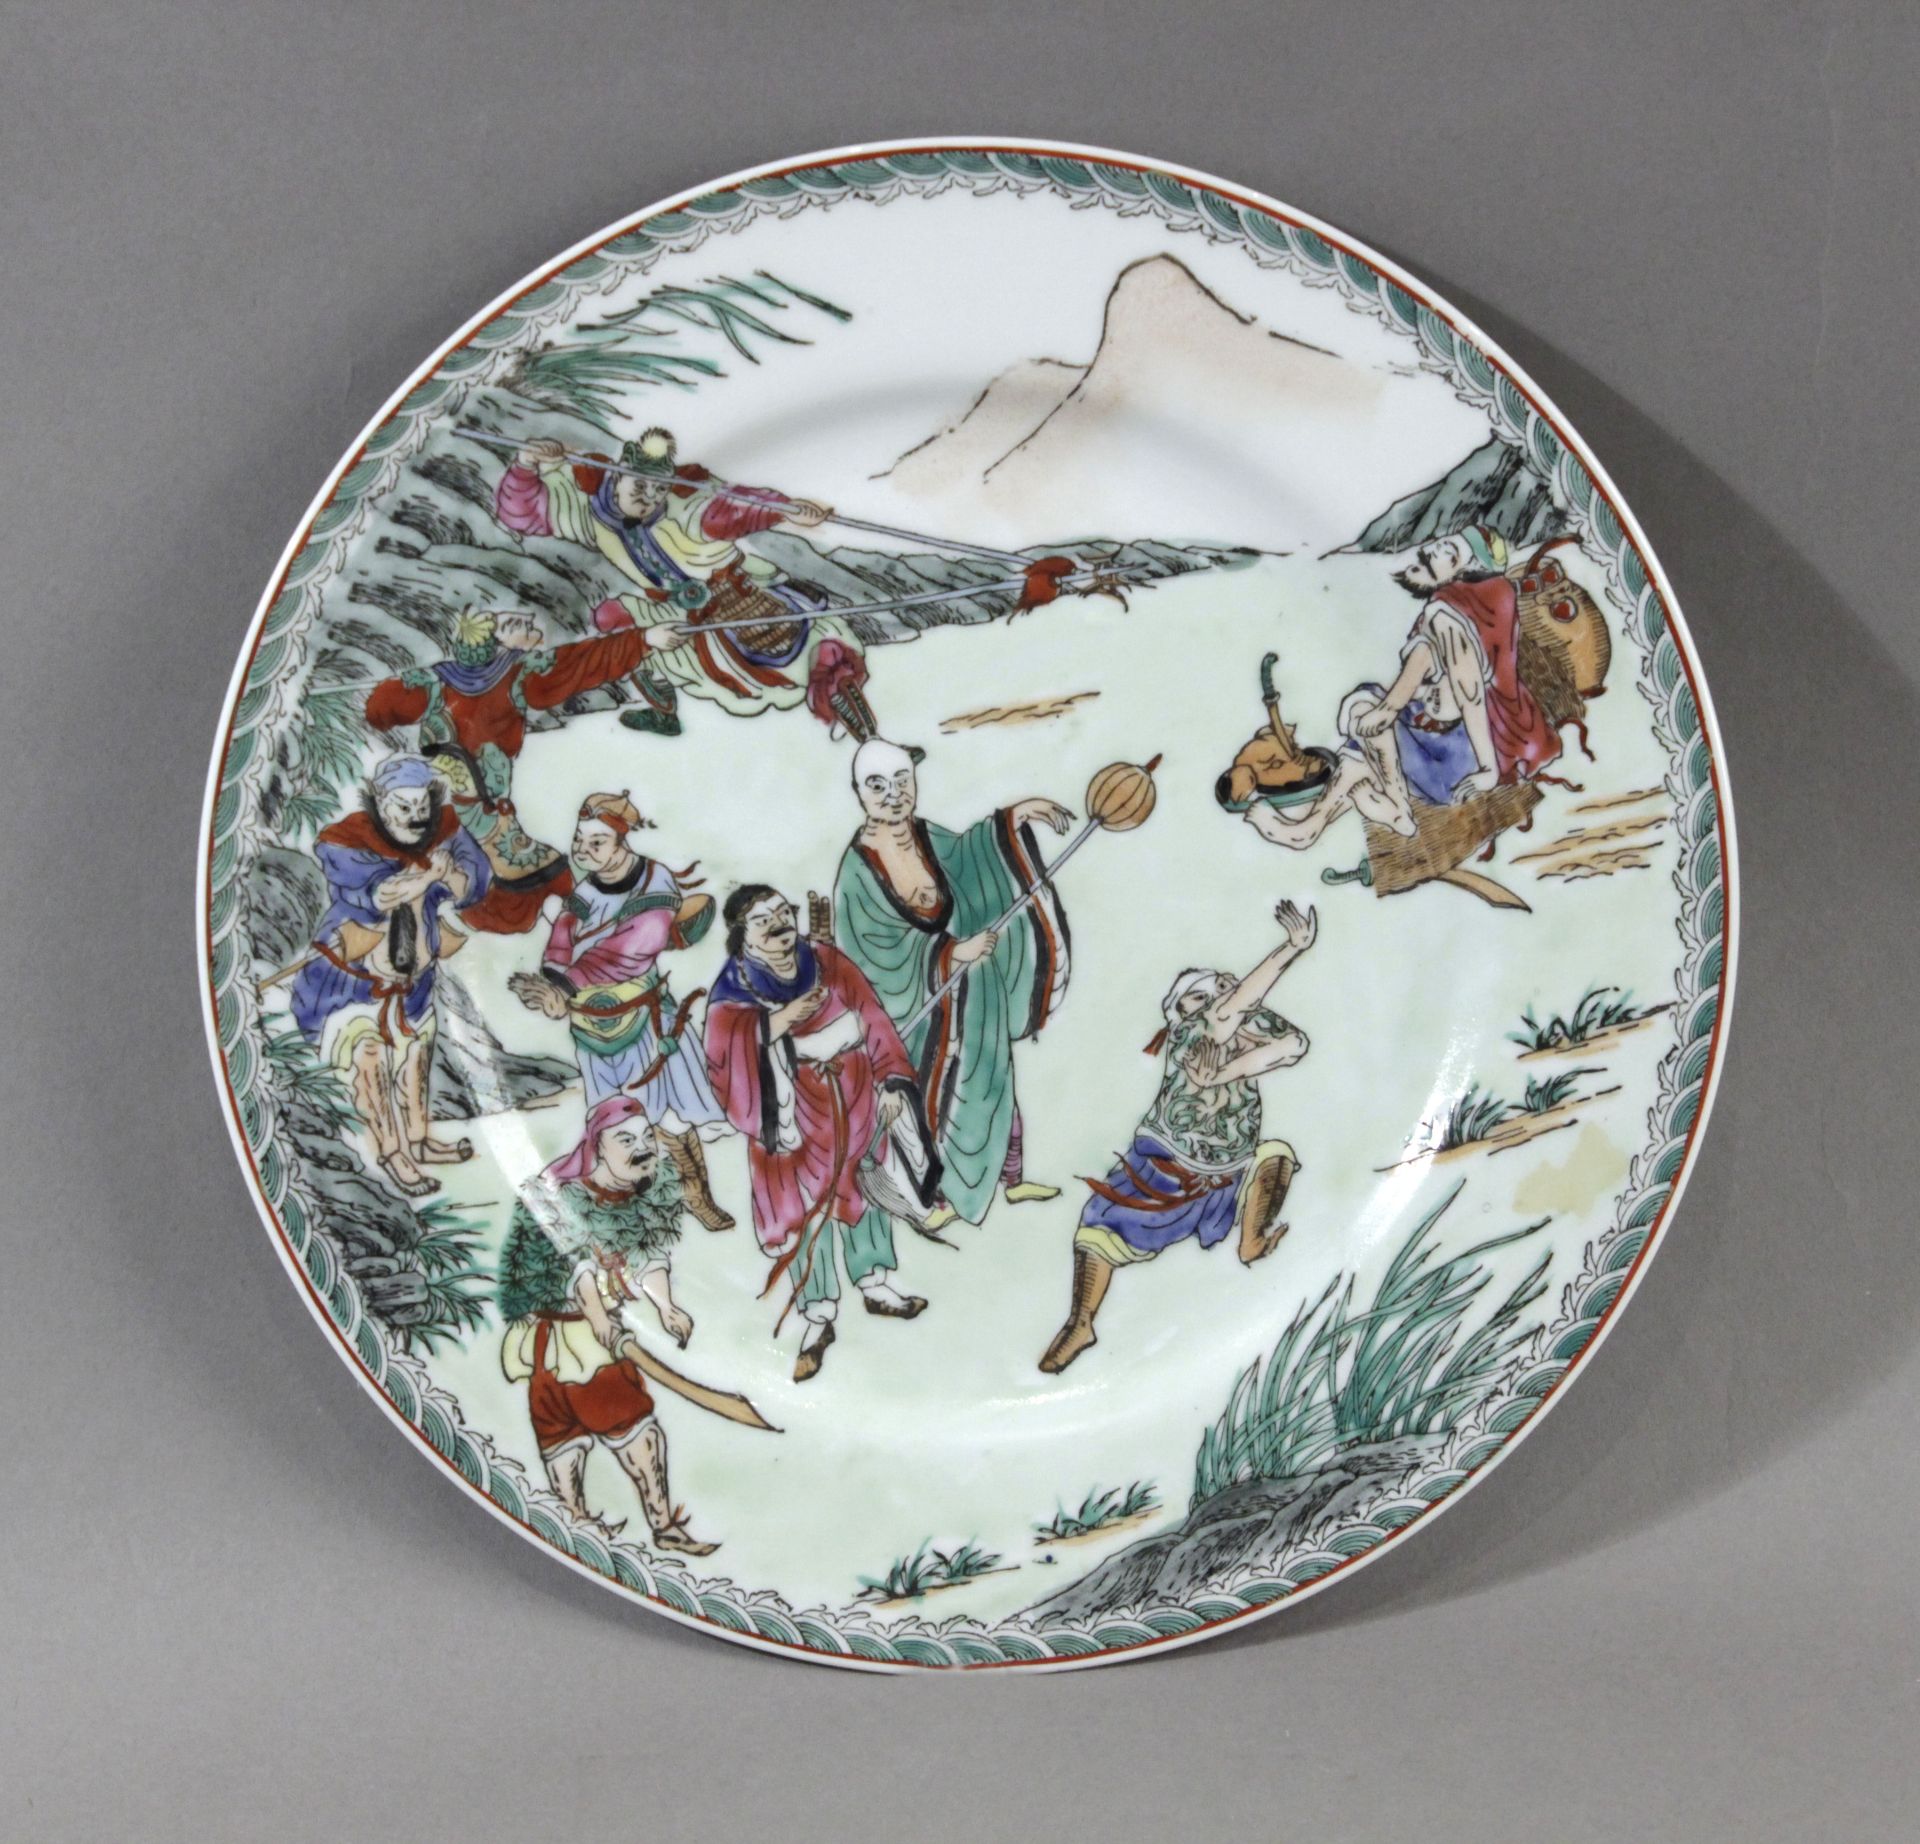 A20th century Chinese dish in Kangxi style Macao porcelain